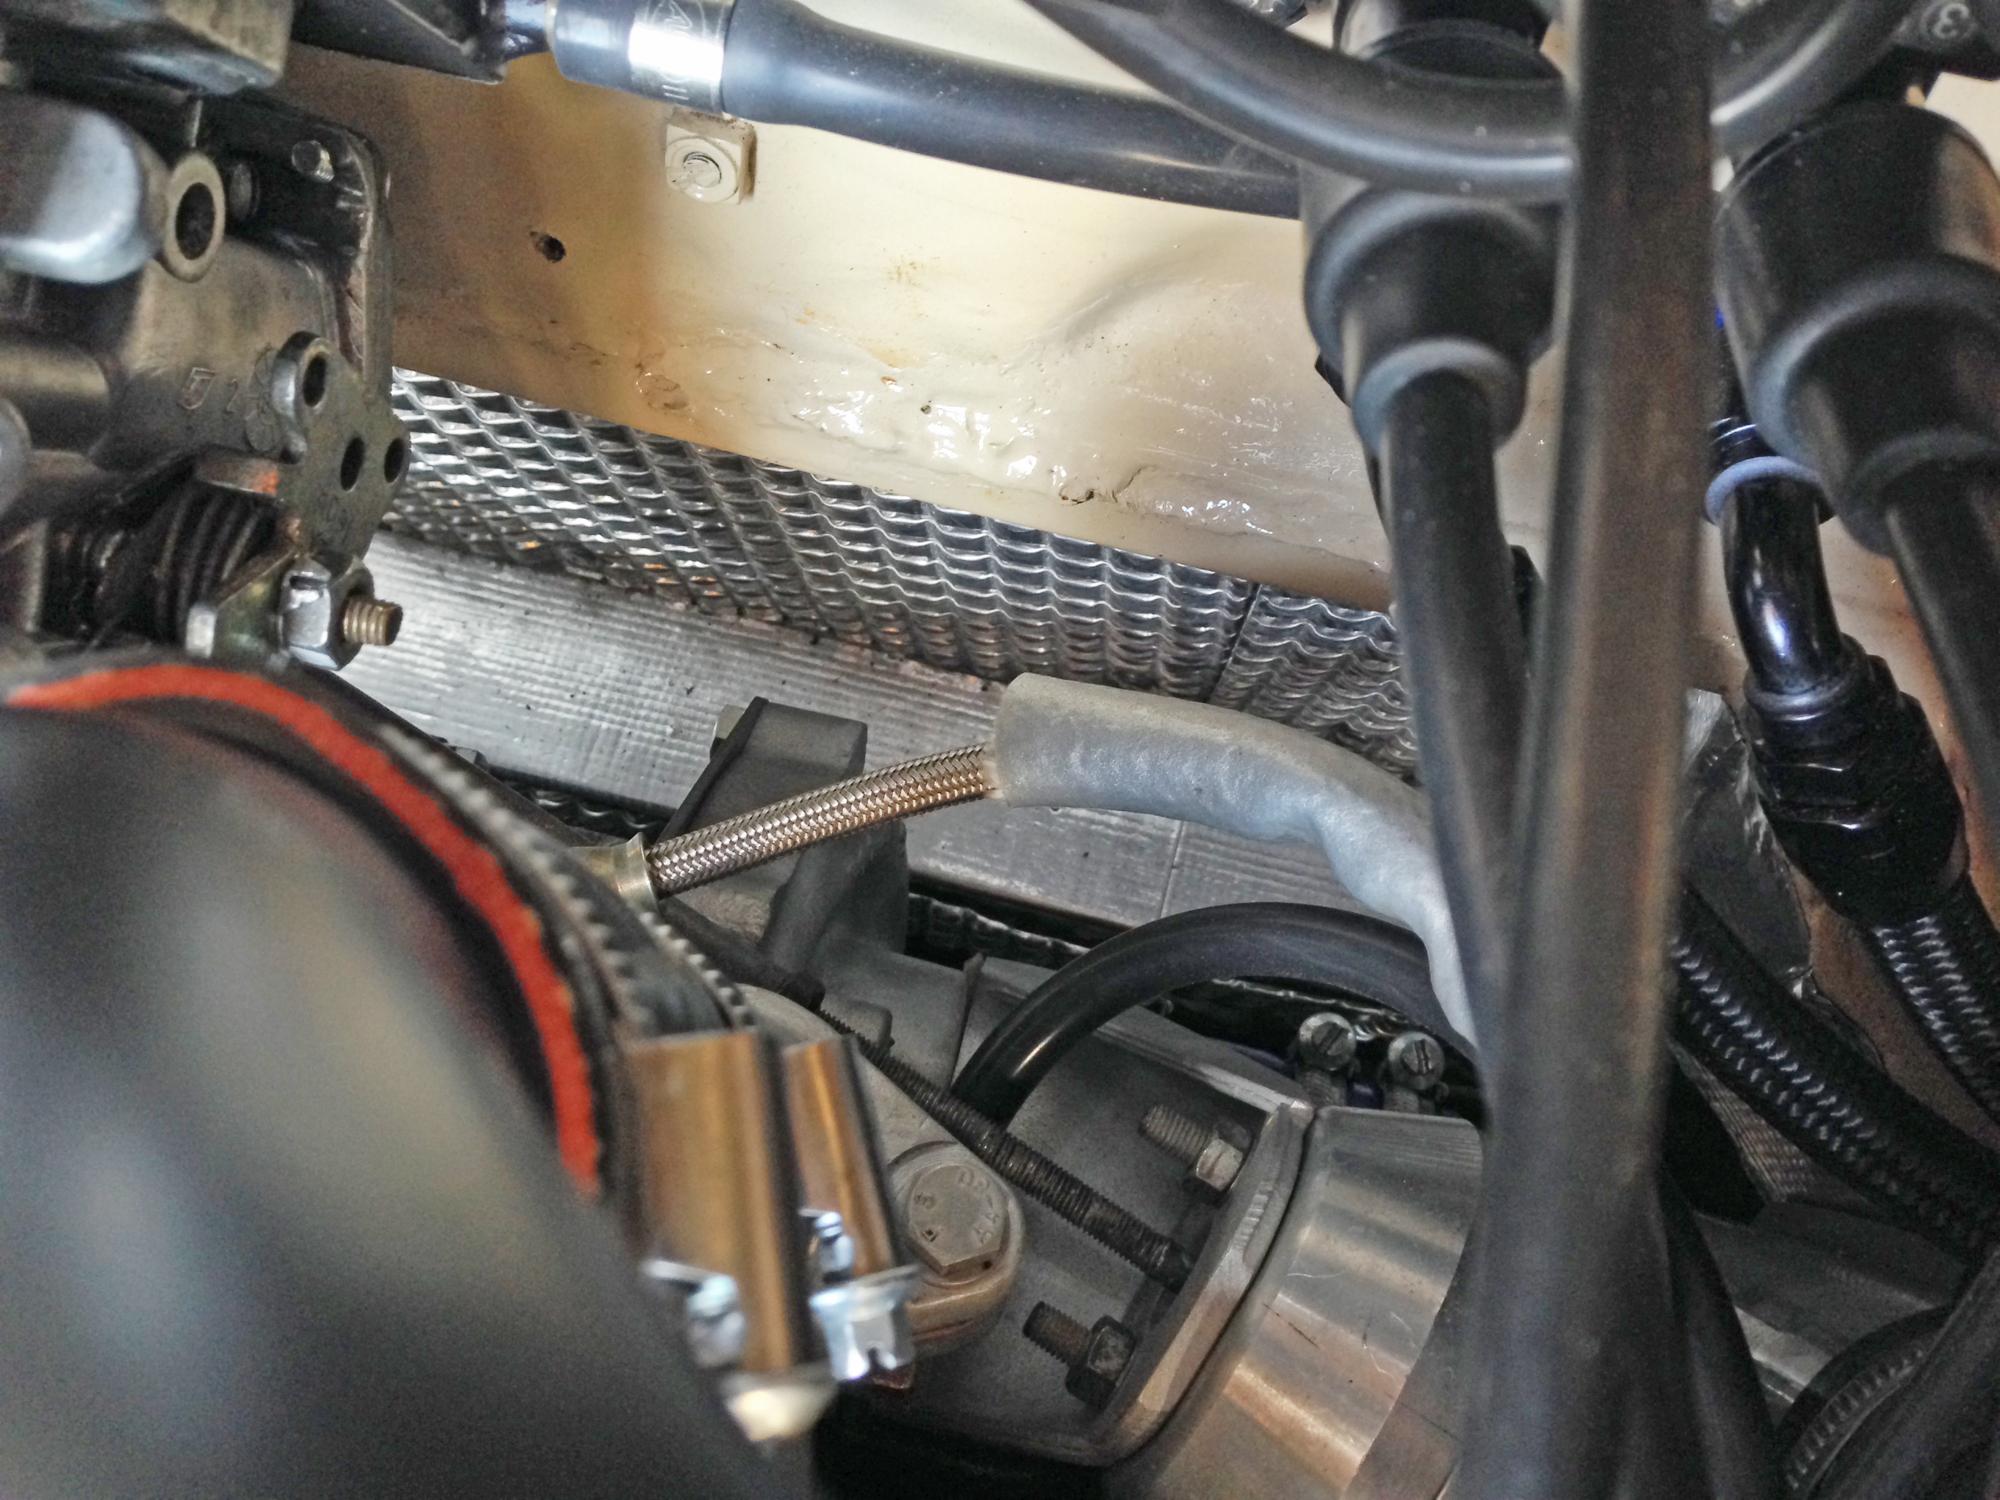 Aerotech and Zircoflex heat shielding fixed to the front bulkhead behind the turbocharger